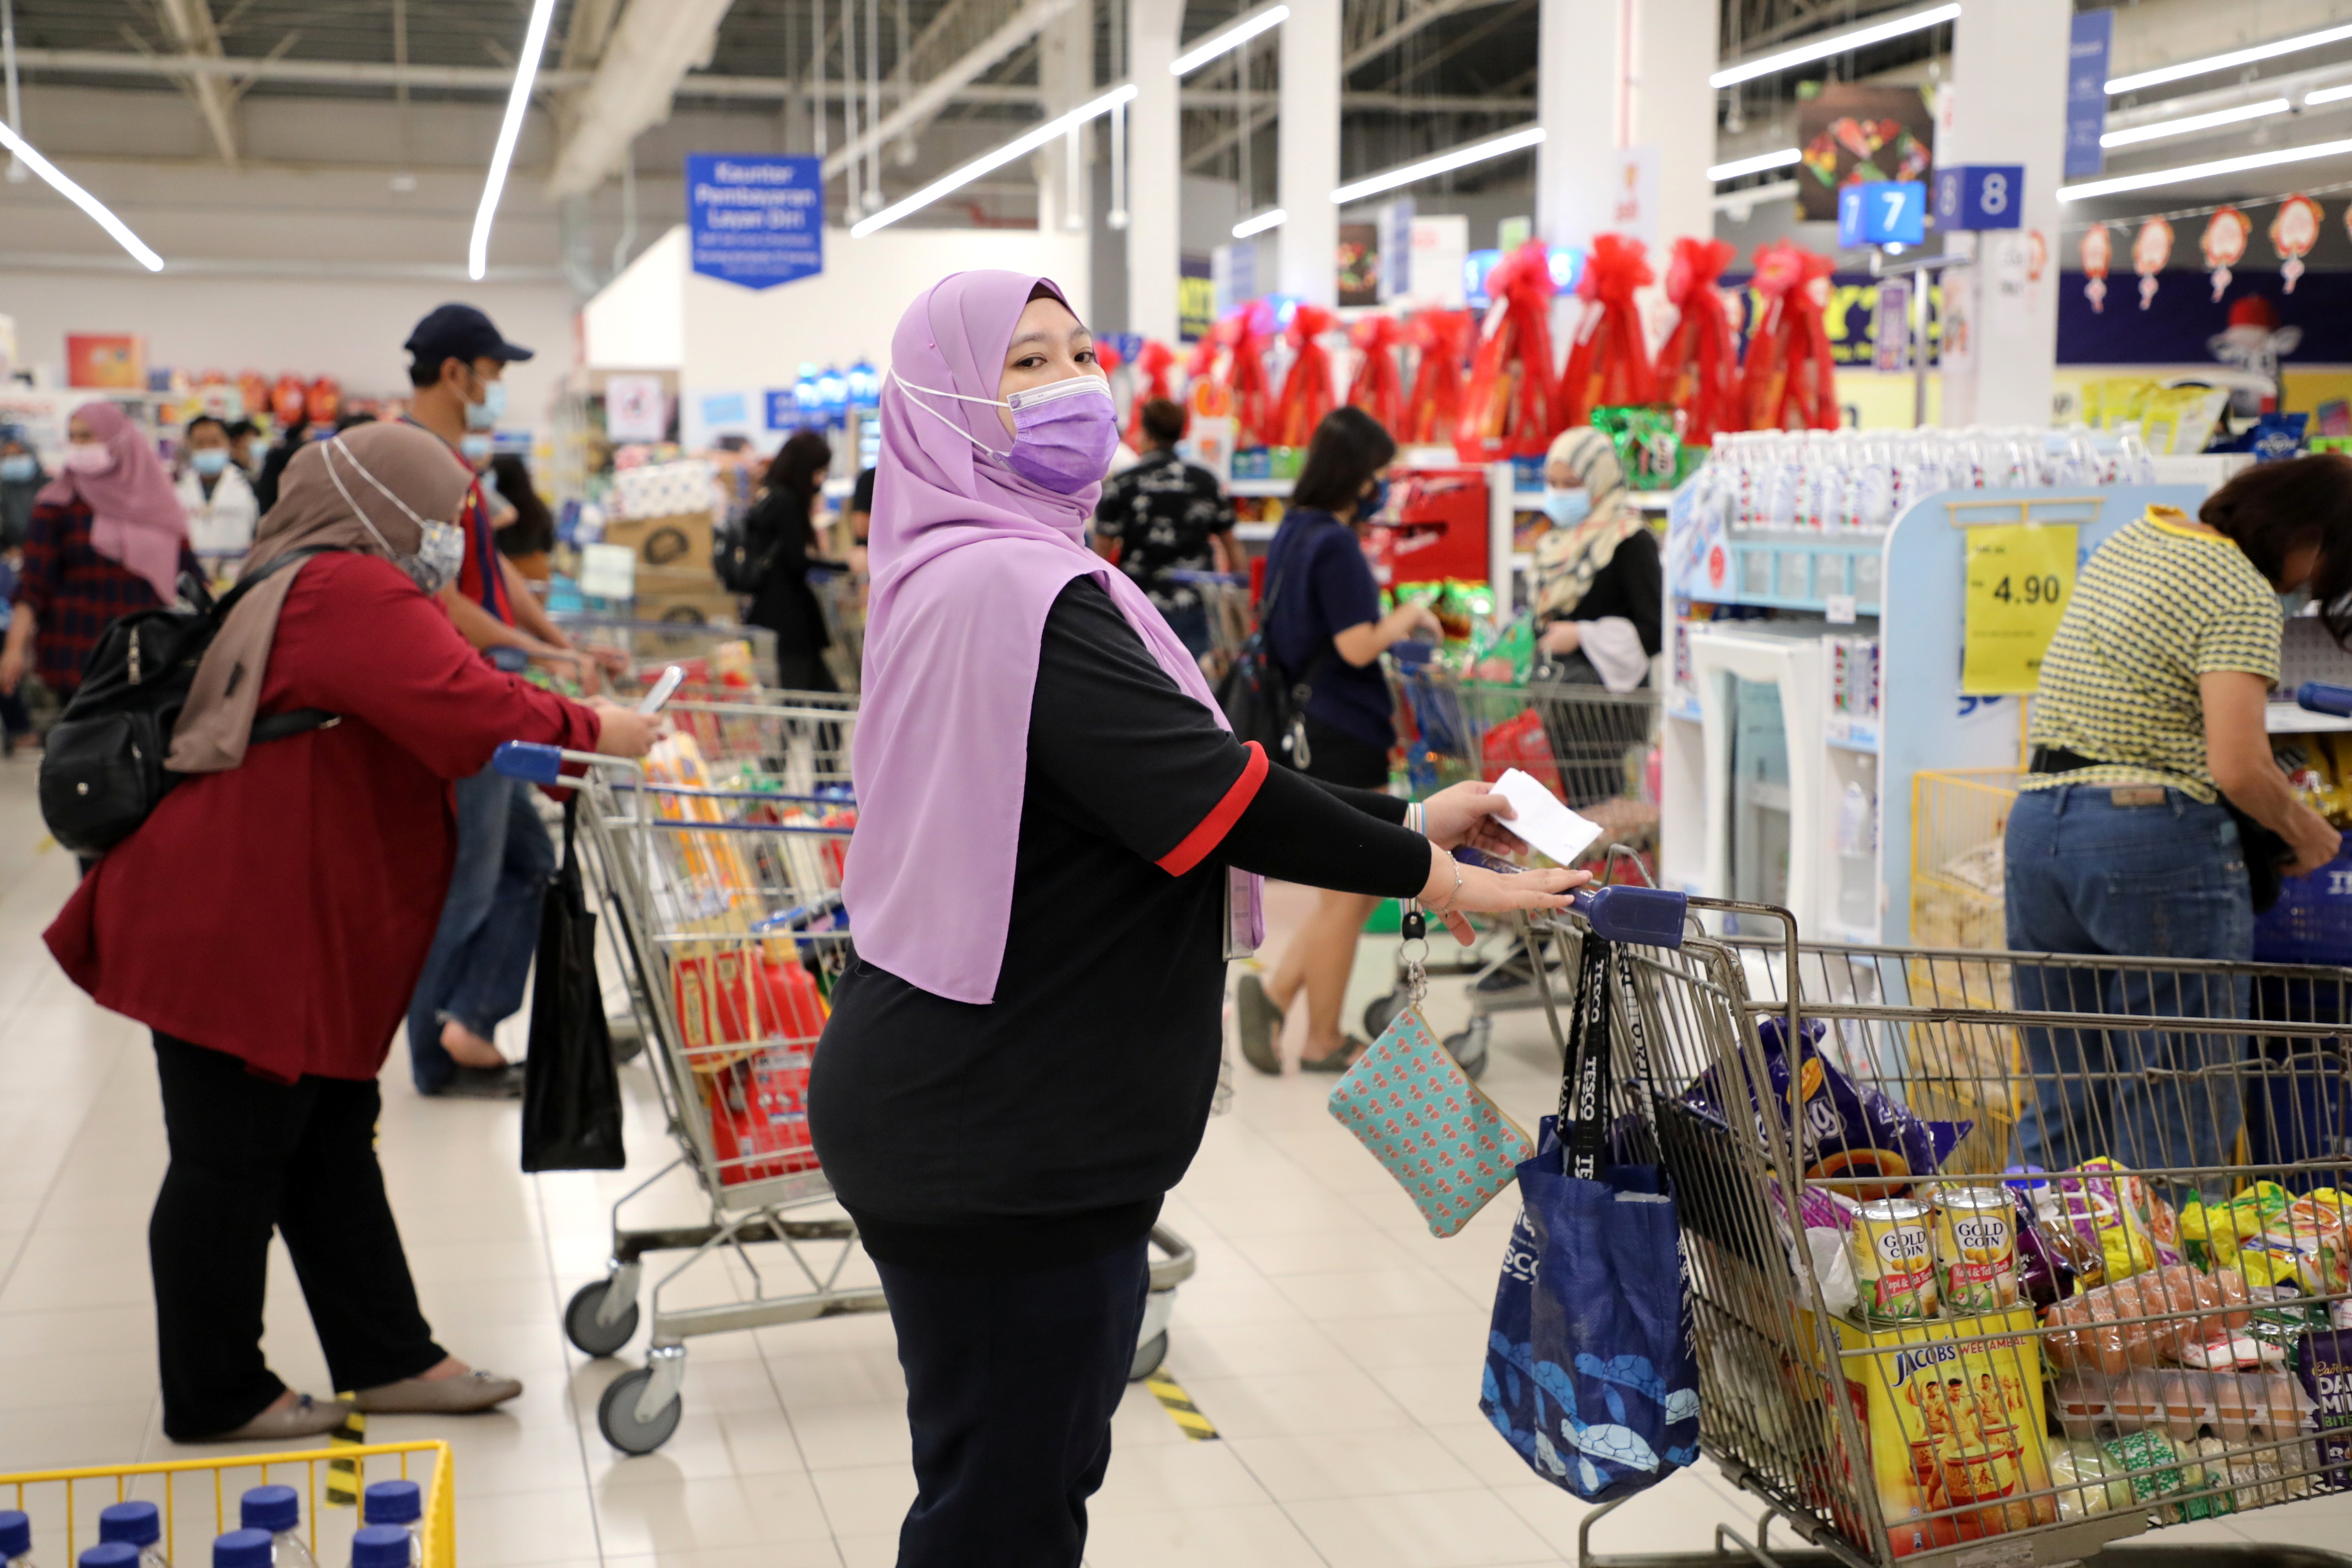 People line up to pay at a supermarket, amid the coronavirus disease (COVID-19) outbreak in Kuala Lumpur